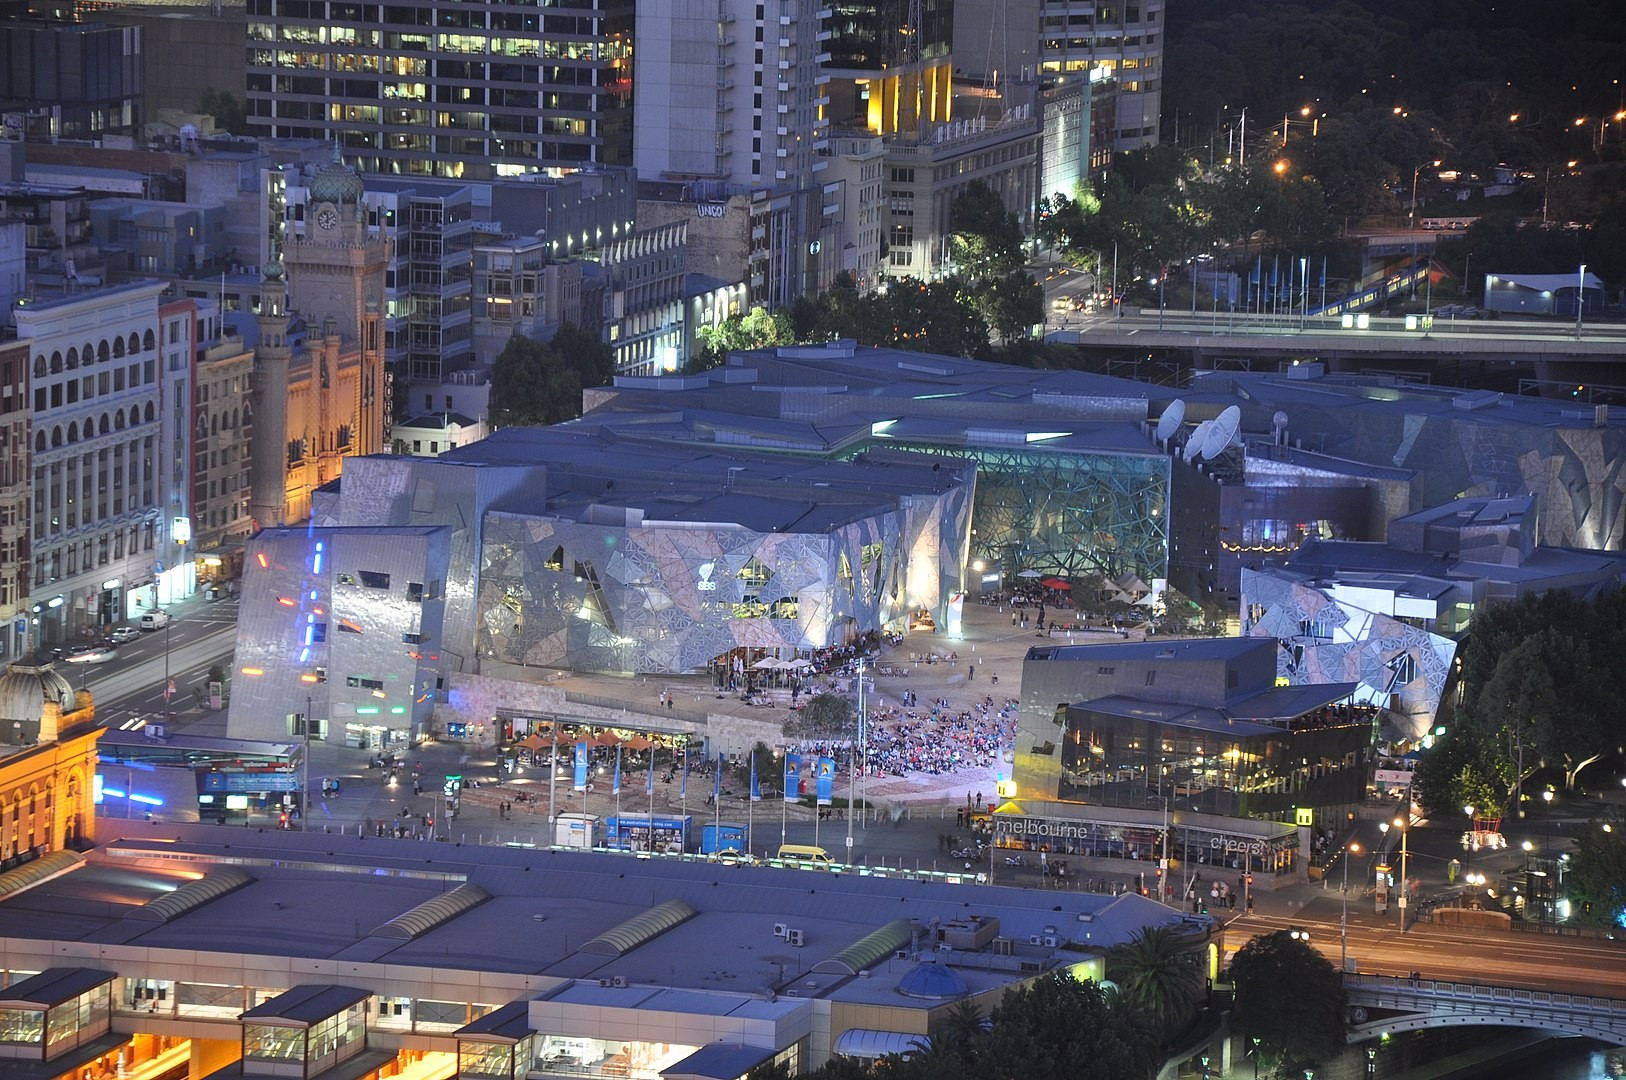 By Jorge Láscar from Australia - Federation Square, CC BY 2.0, https://commons.wikimedia.org/w/index.php?curid=31949778